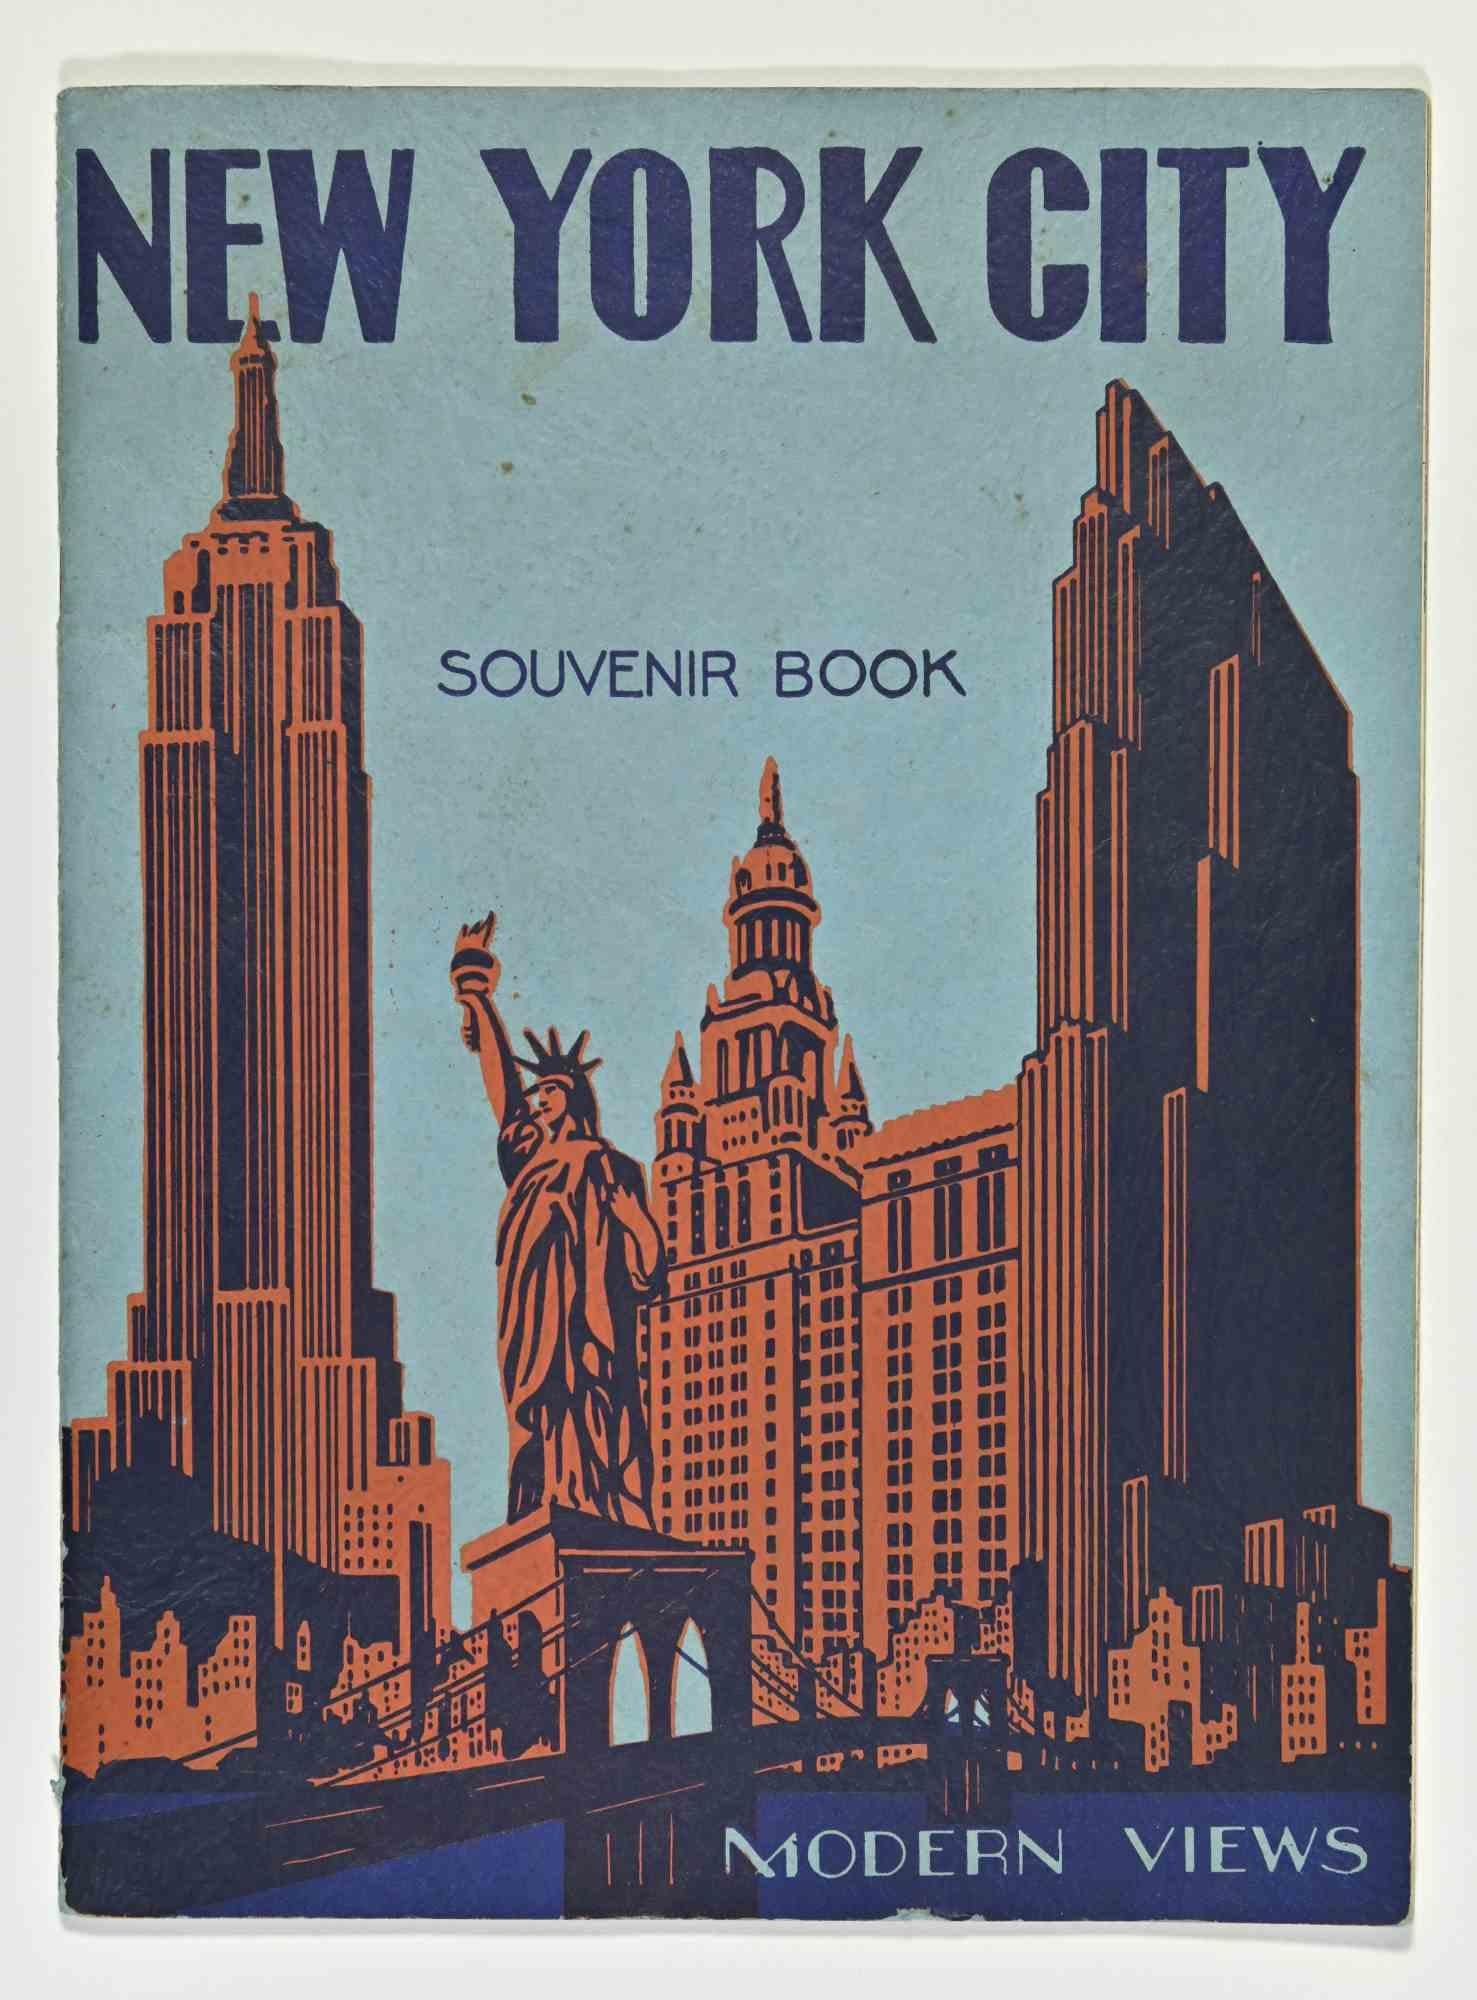 A Book of Modern Views of New York City  - 1937 - Art by Various Artists